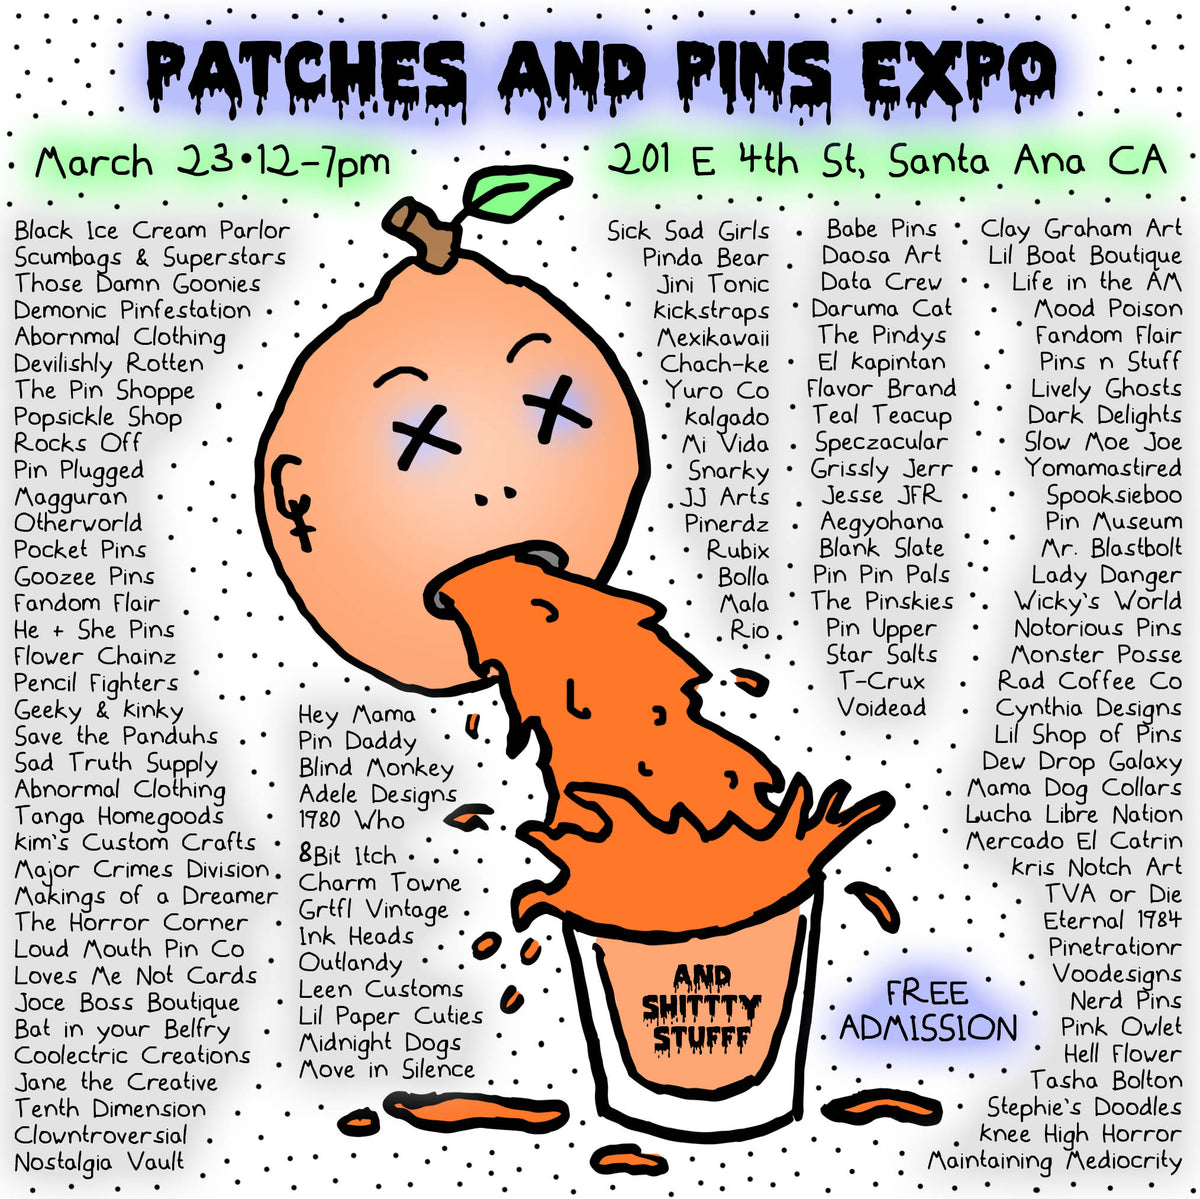 MARCH 23, 2019 // PATCHES & PINS EXPO